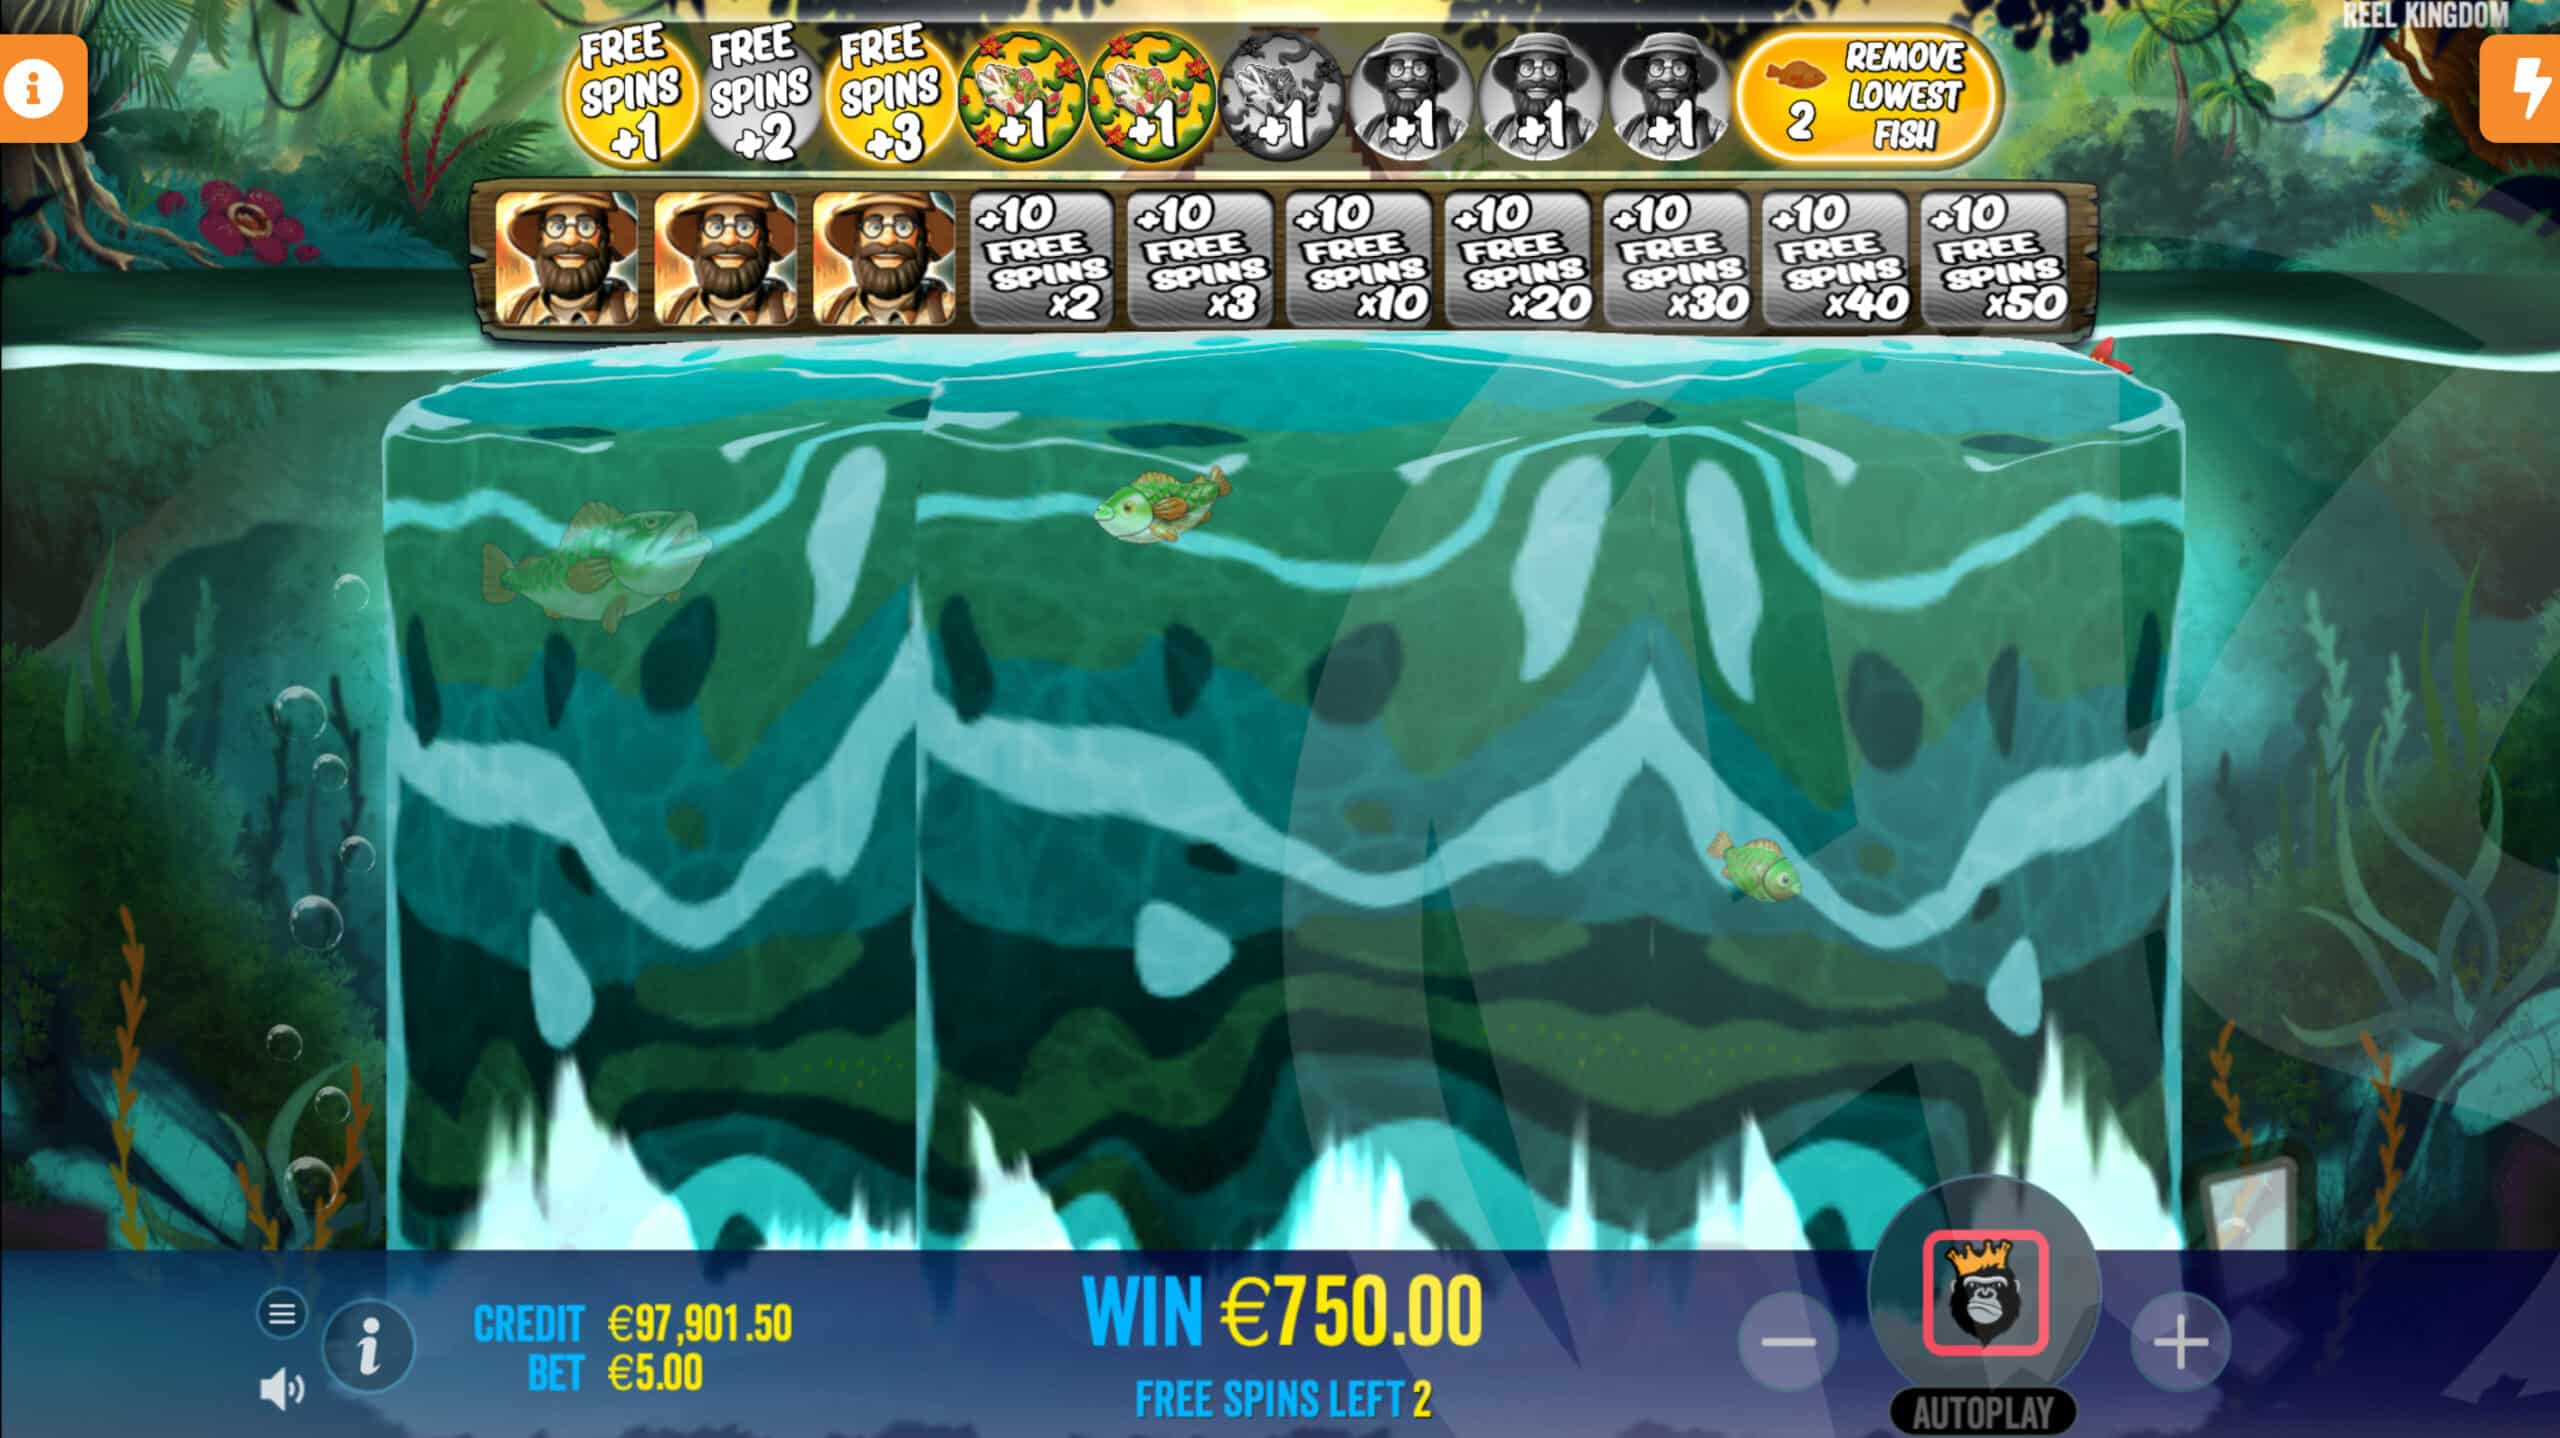 The Waterfall Feature Can Add Fish Money Symbols to the Reels